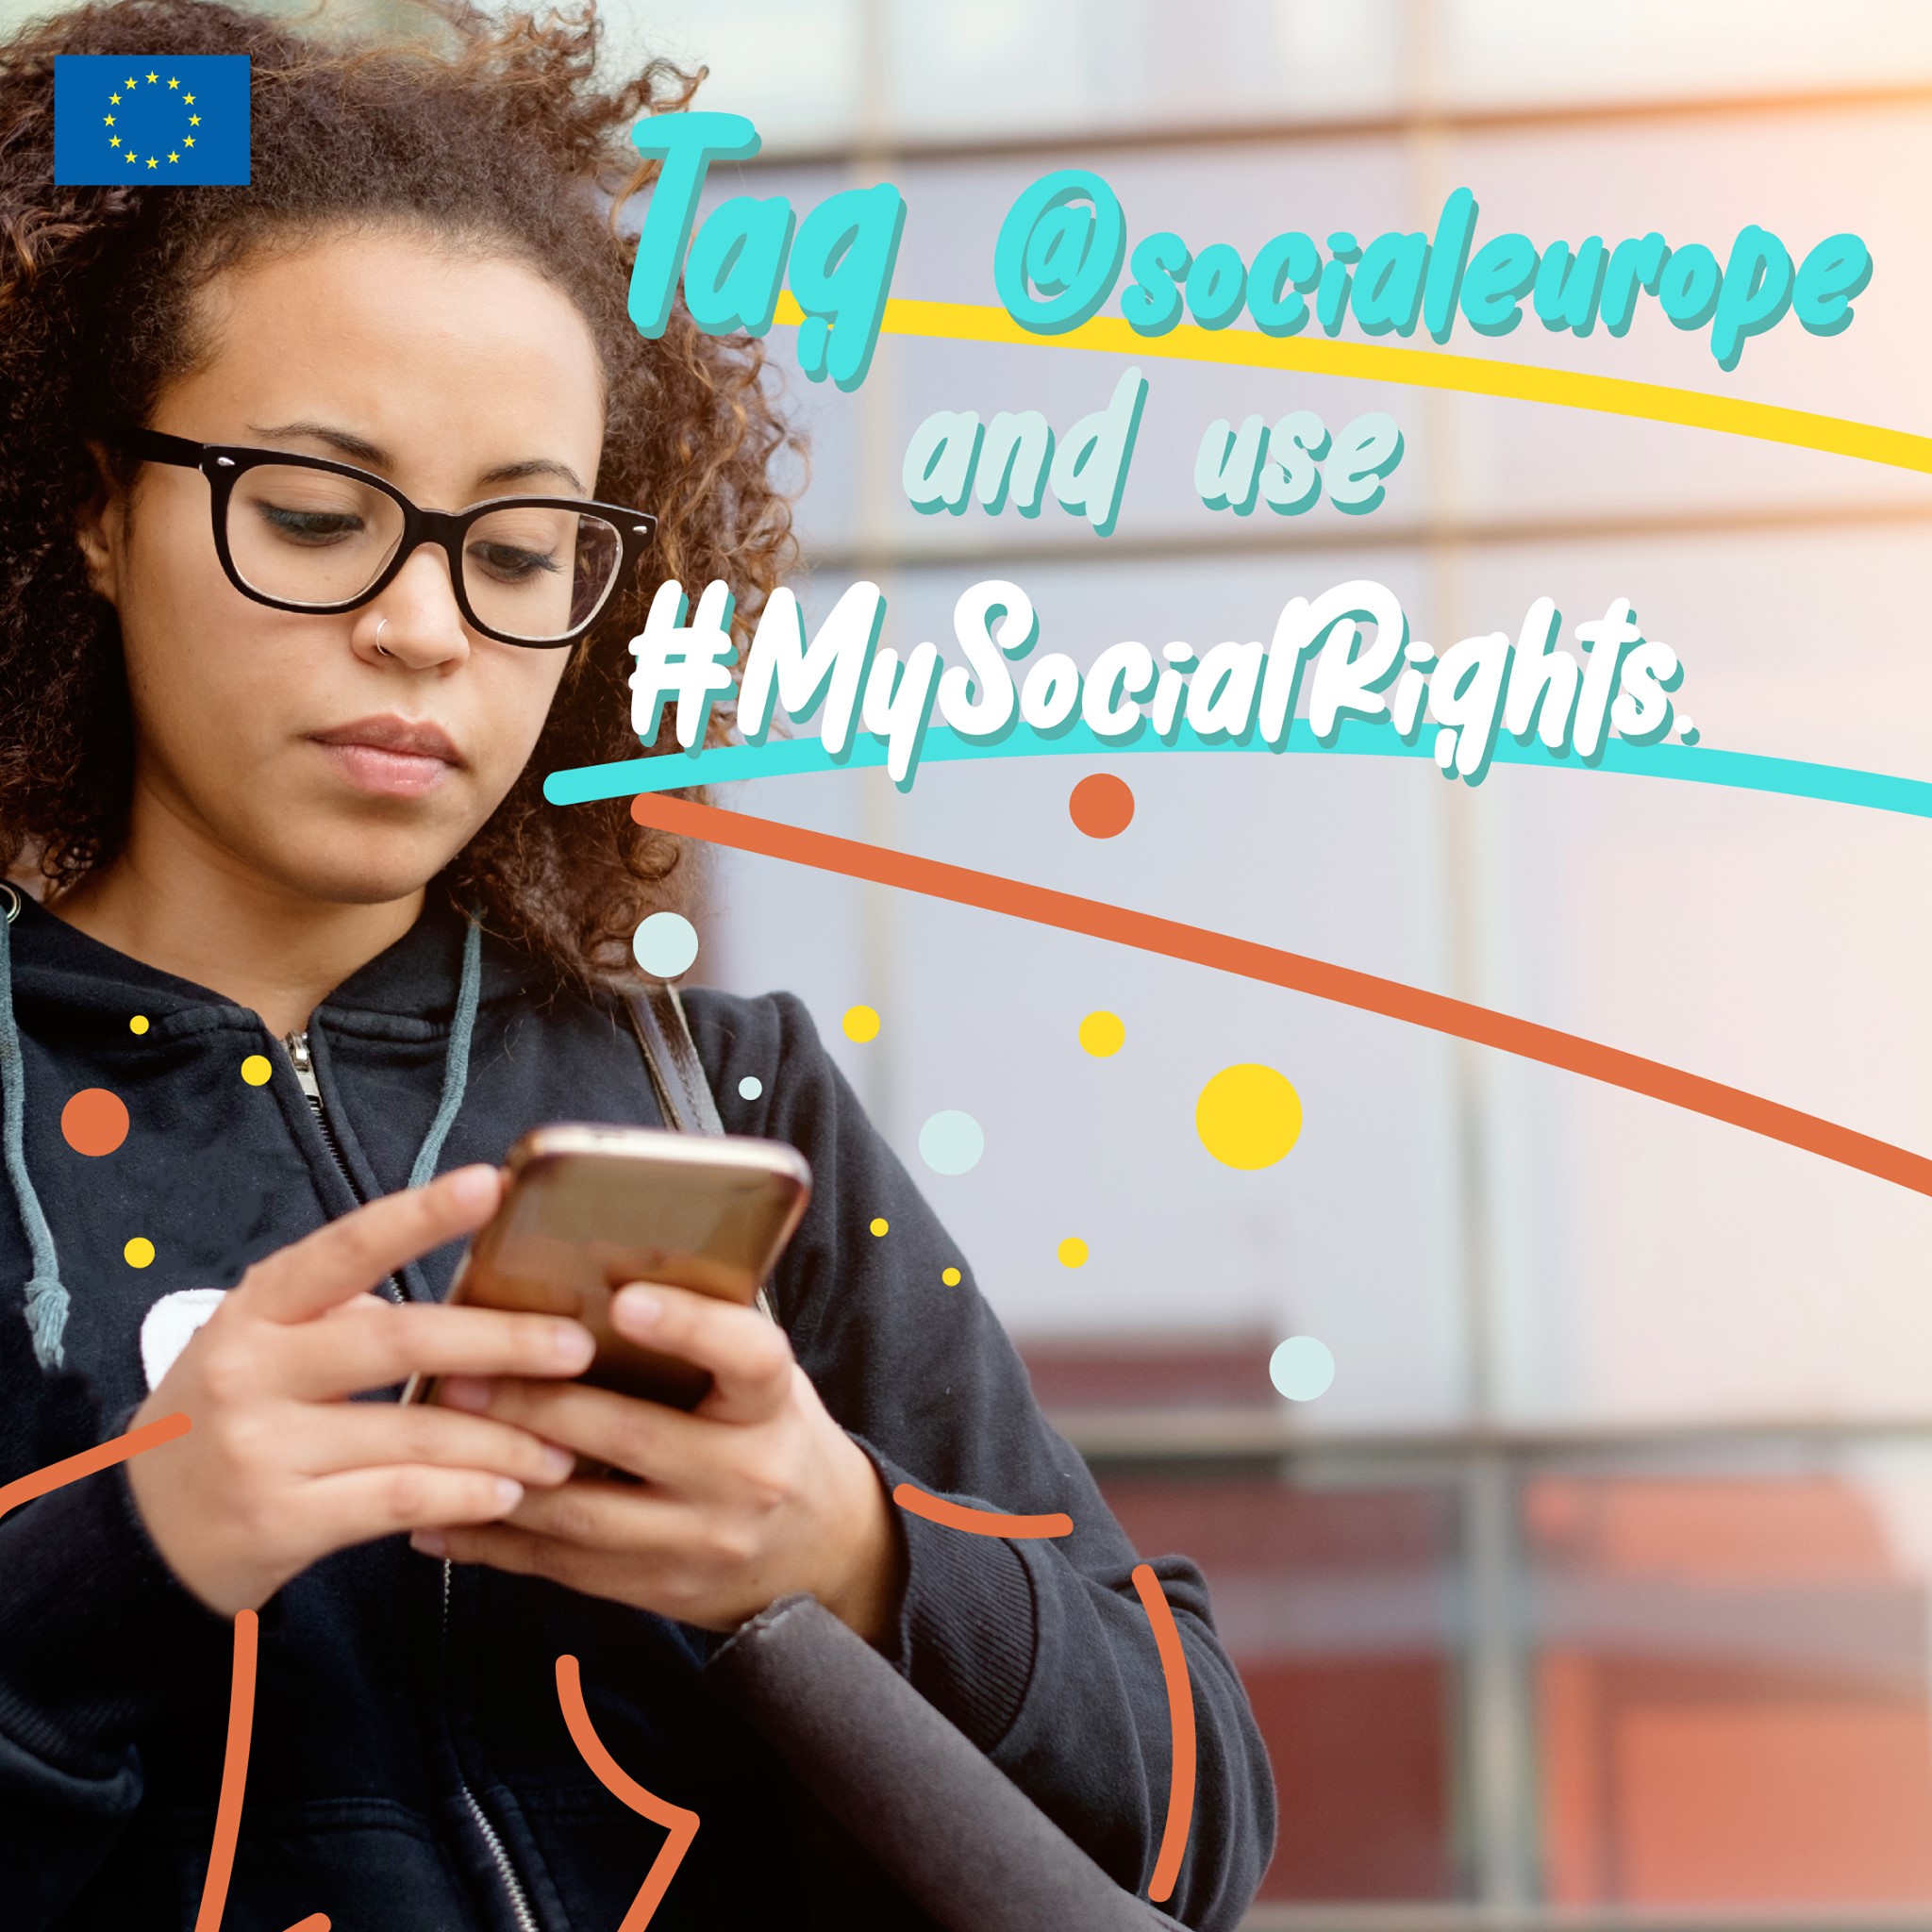 #MySocialRights video competition for youth!